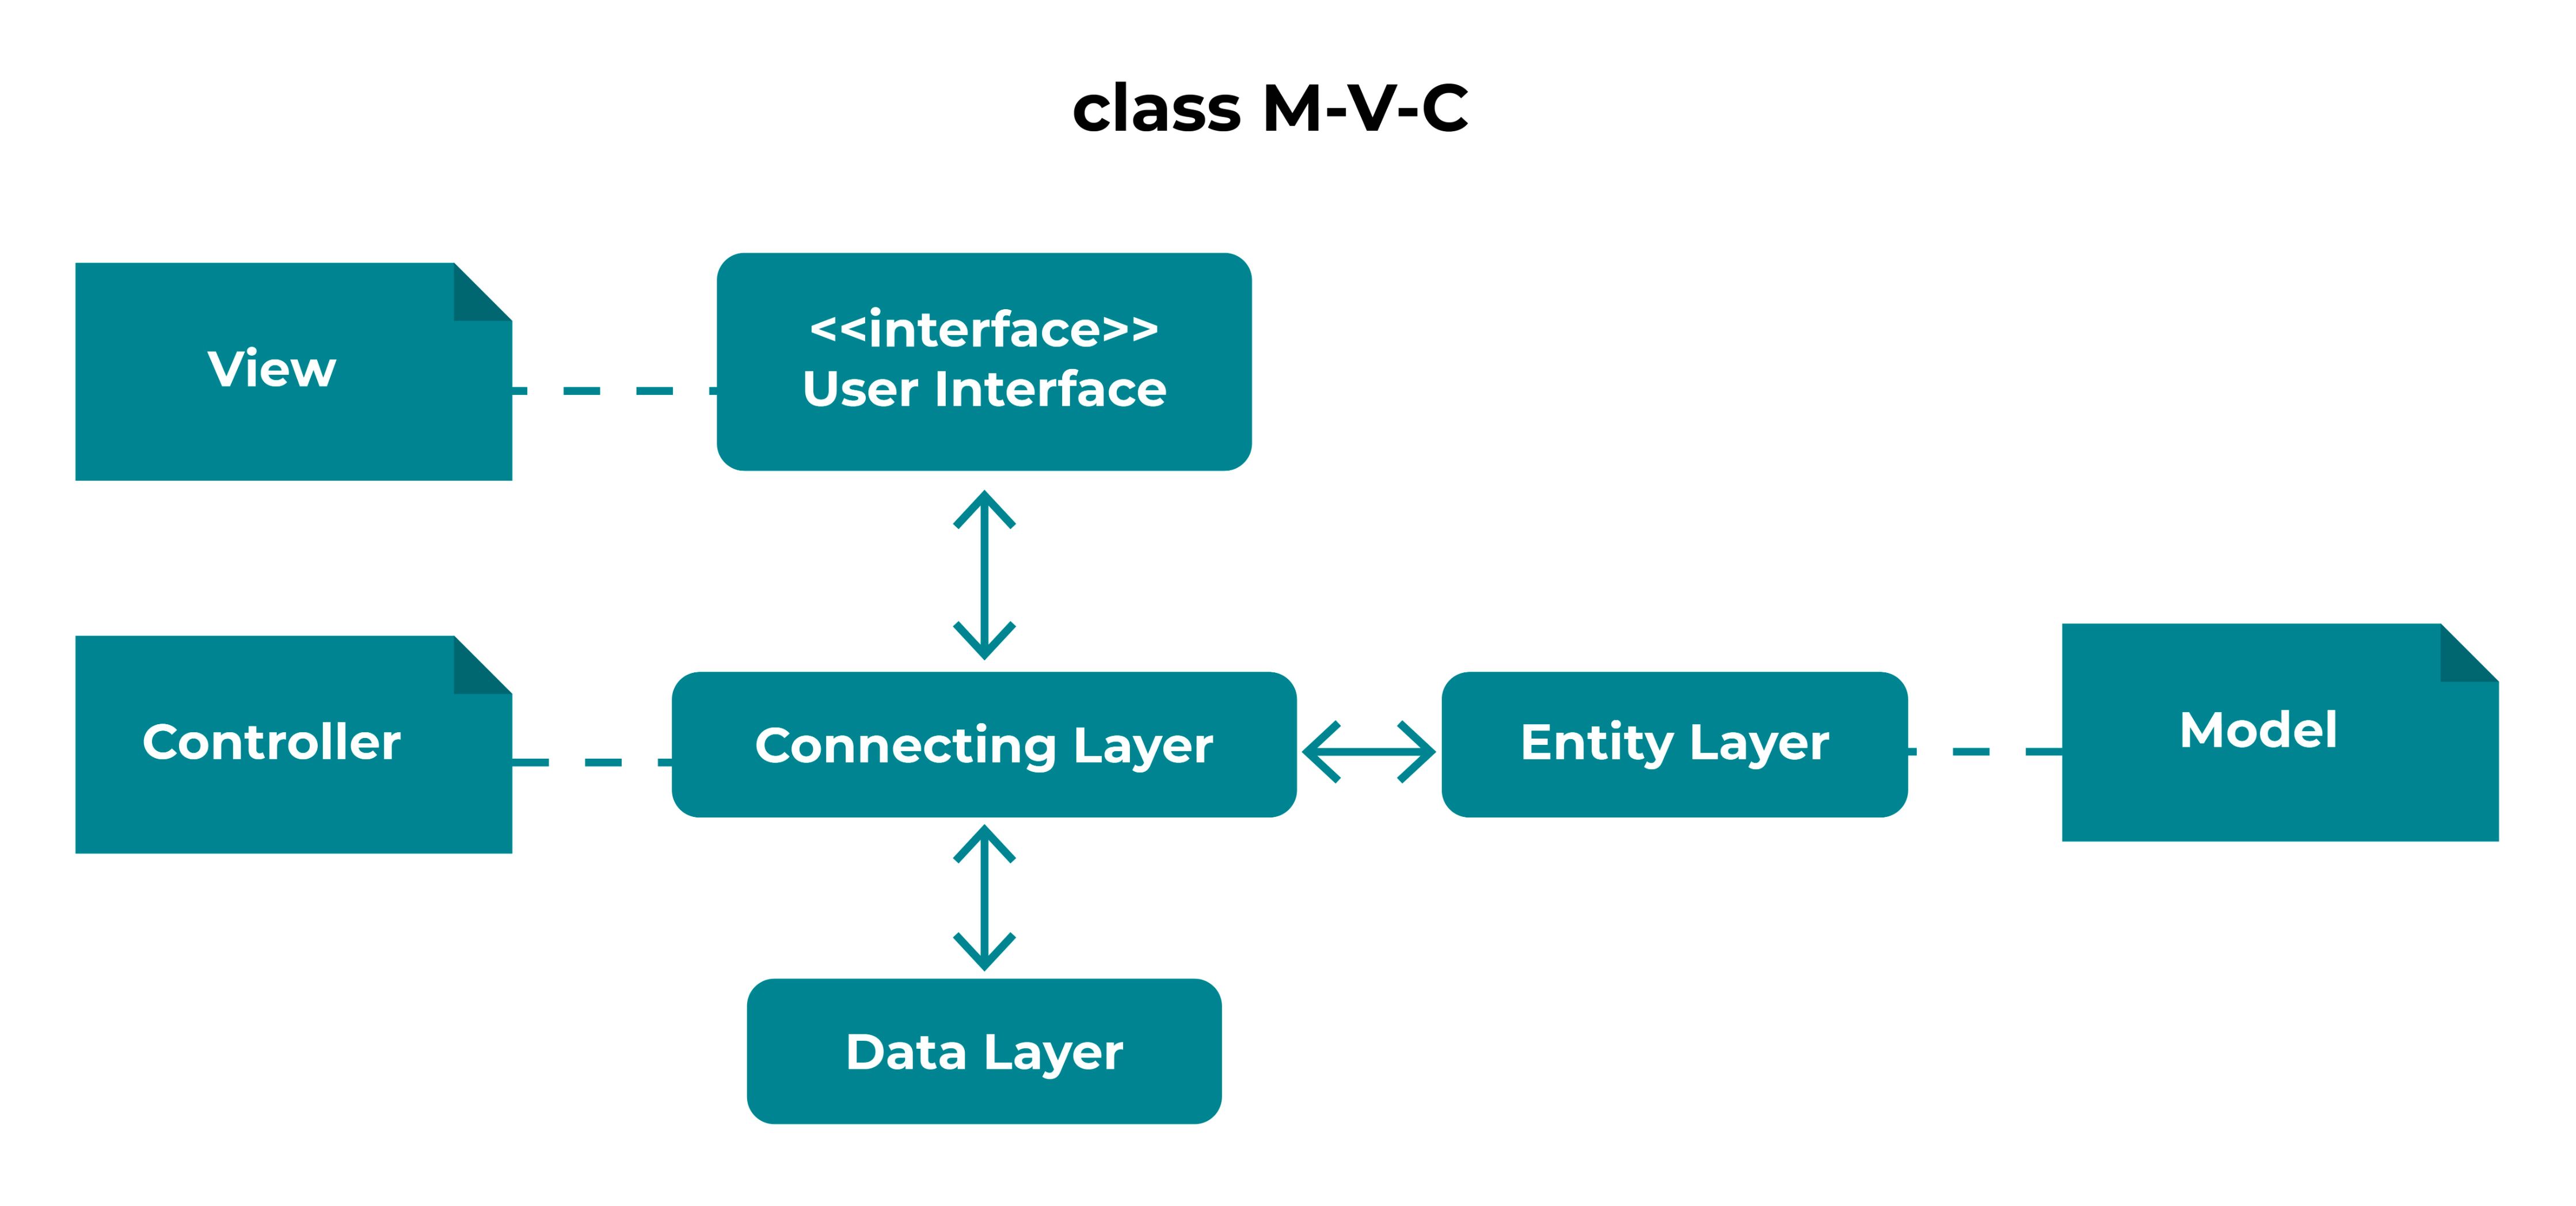 User interface = View, Connecting Layer = Controller, Entity layer = Model, Data layer is separate